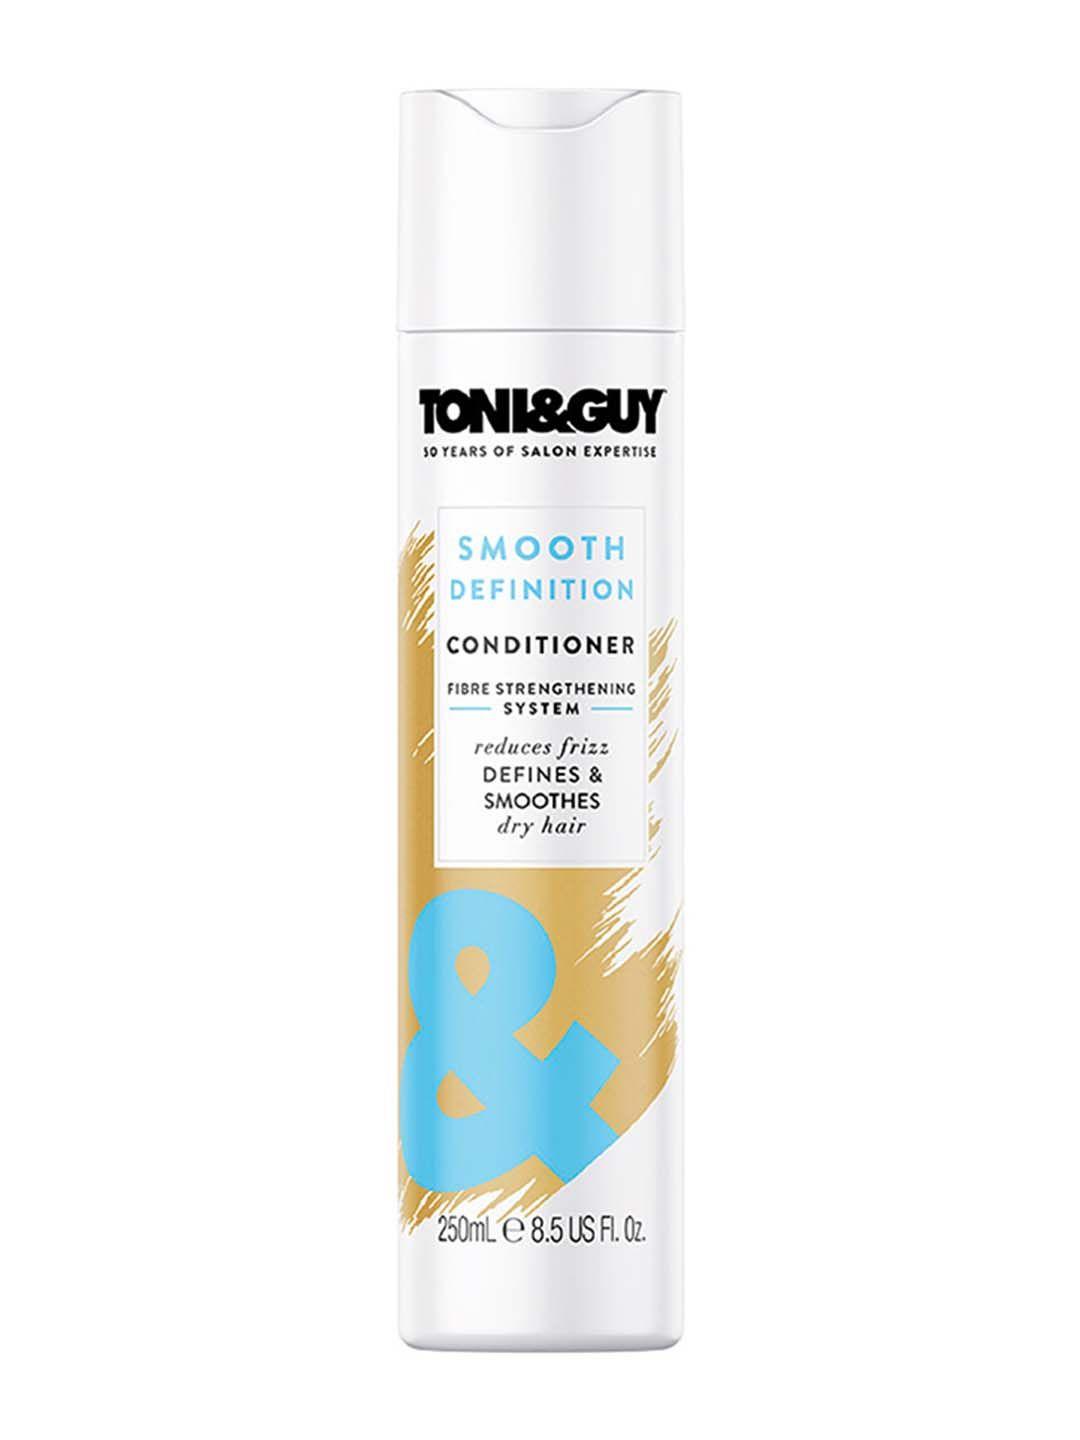 toni & guy smooth definition conditioner for dry frizzy hair - 250ml